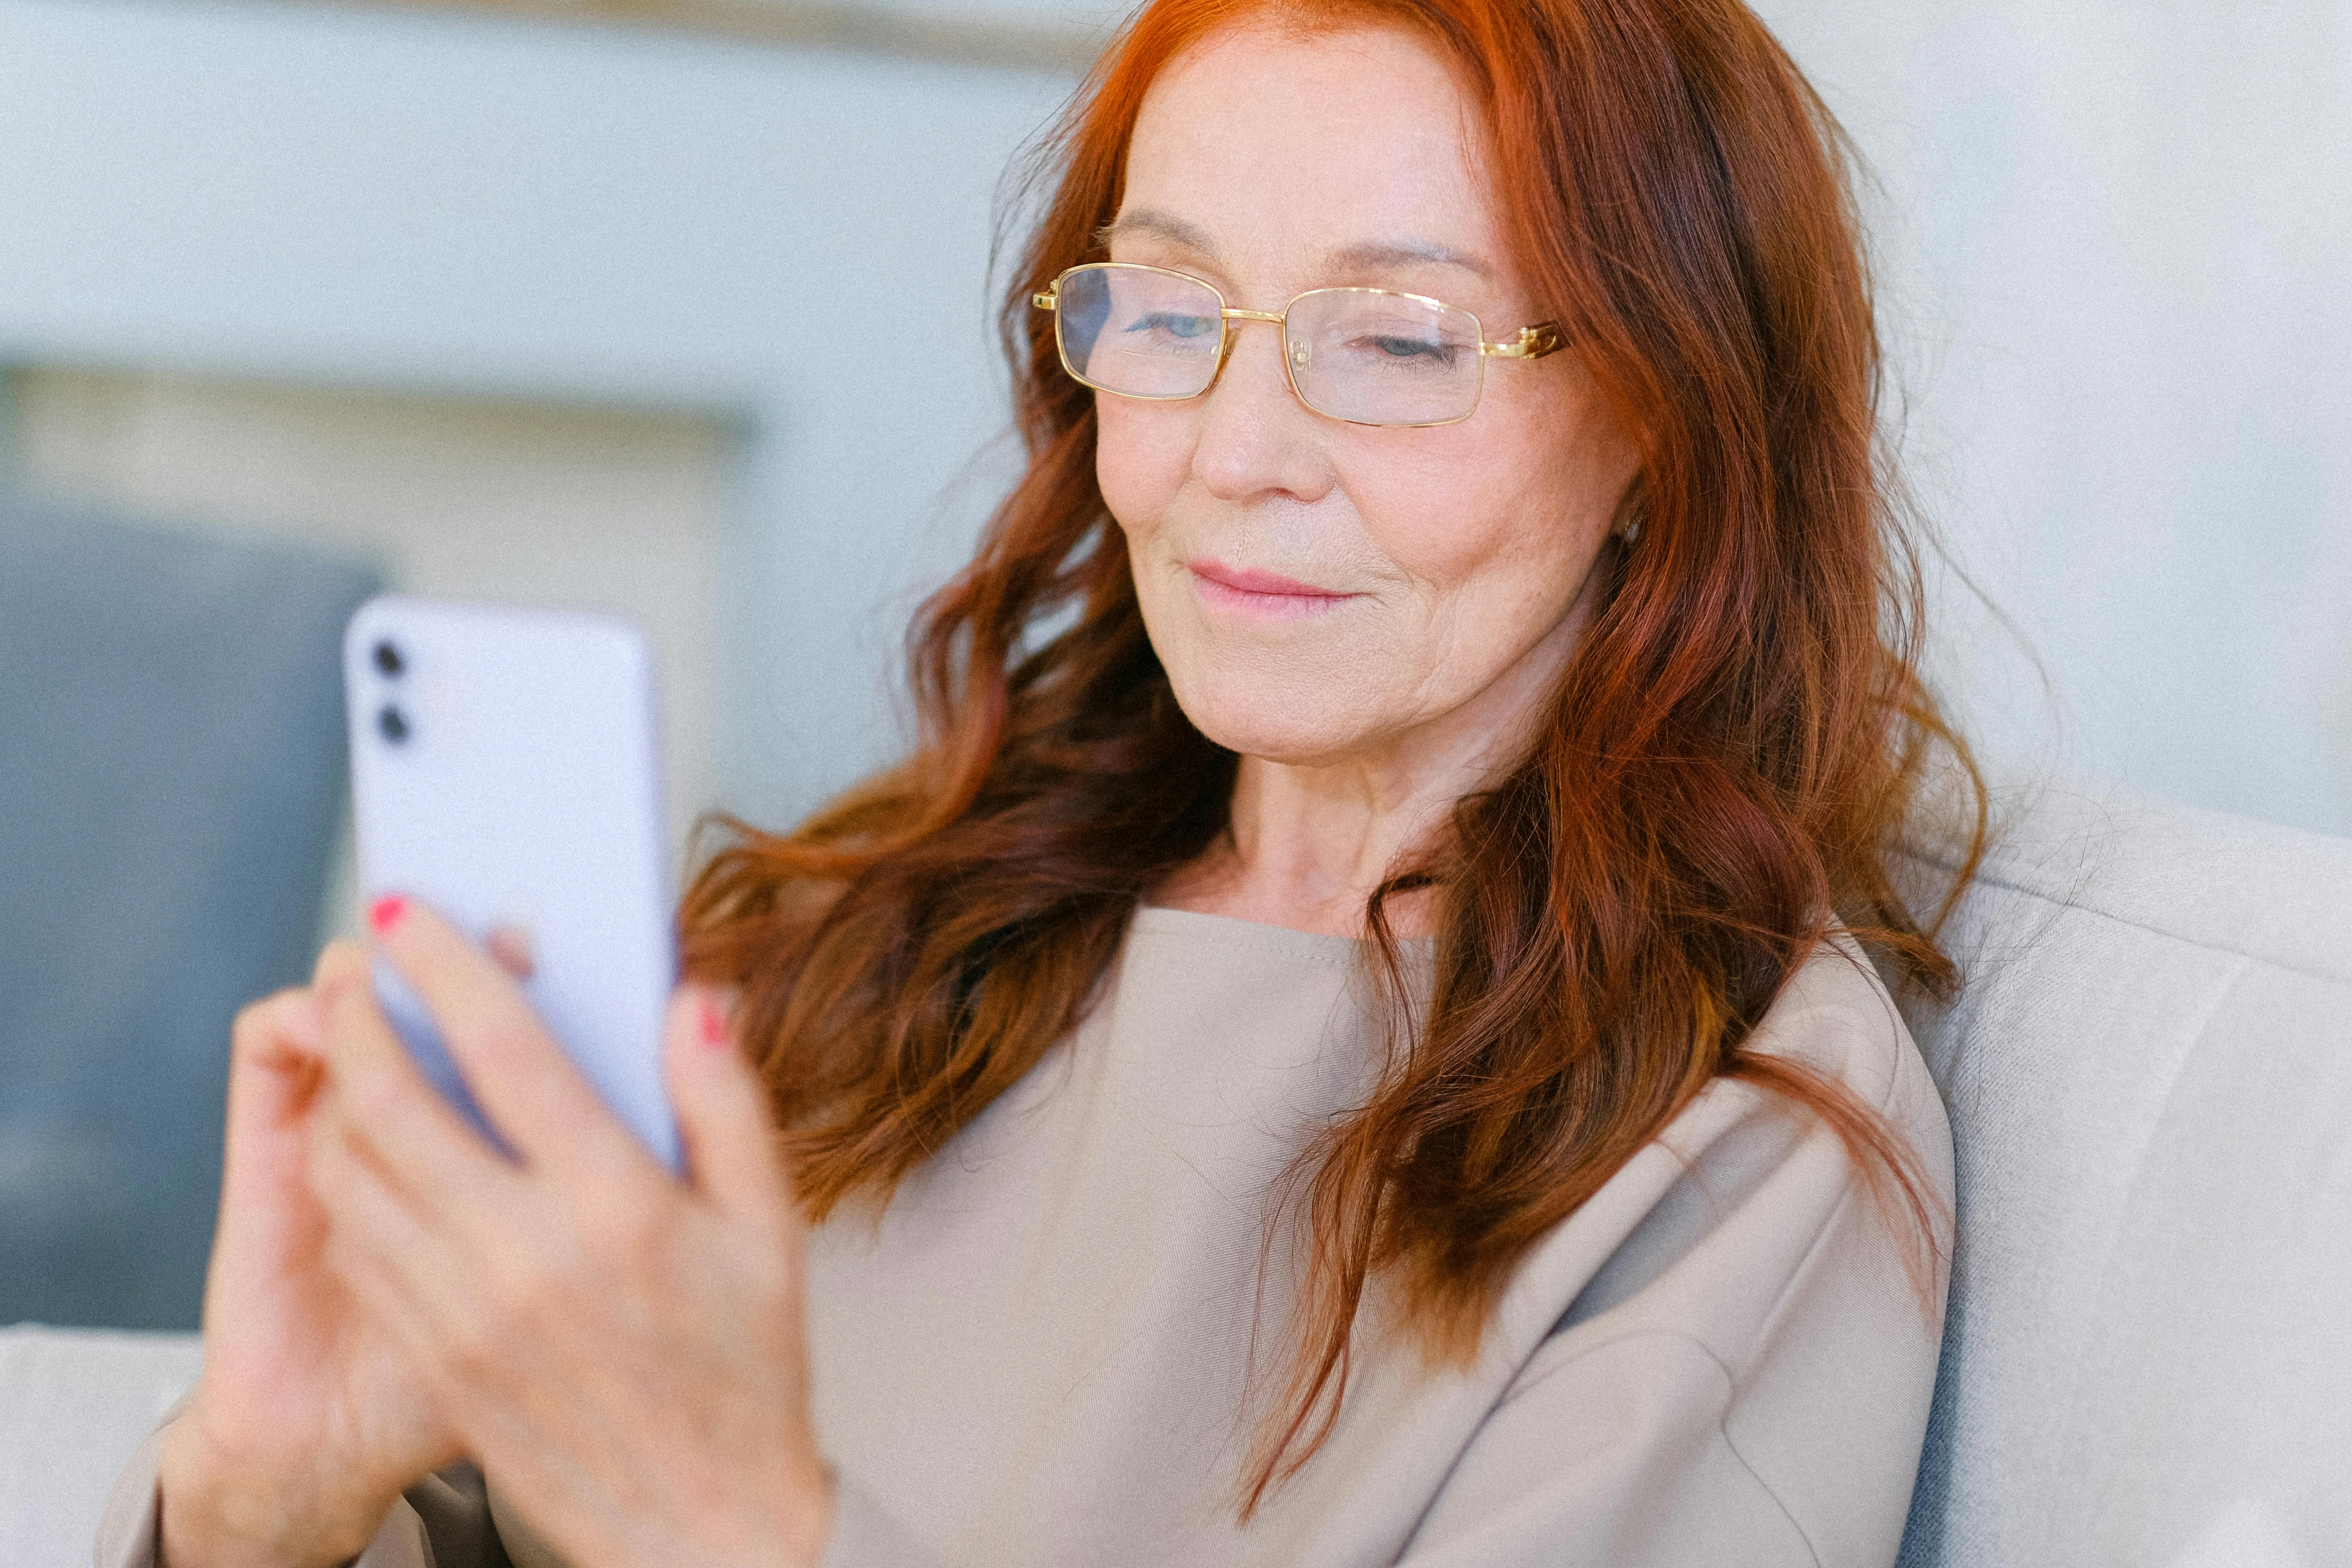 A happy woman on her phone | Source: Pexels